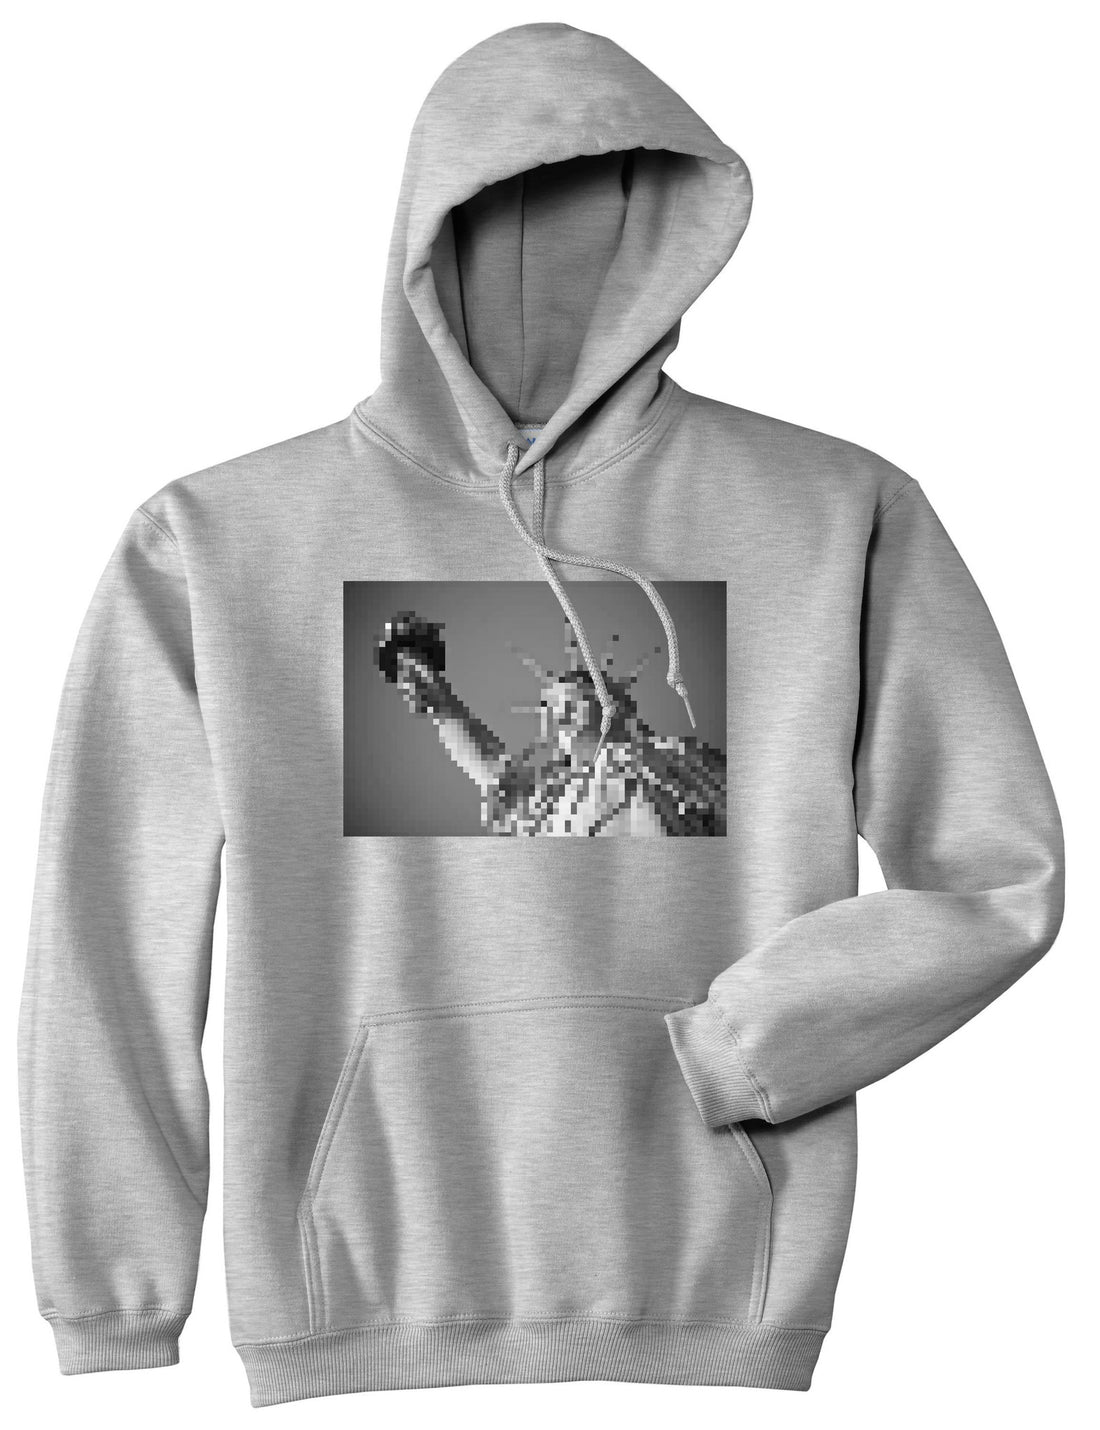 Statue Of Liberty Pixelated Boys Kids Pullover Hoodie Hoody in Grey by Kings Of NY